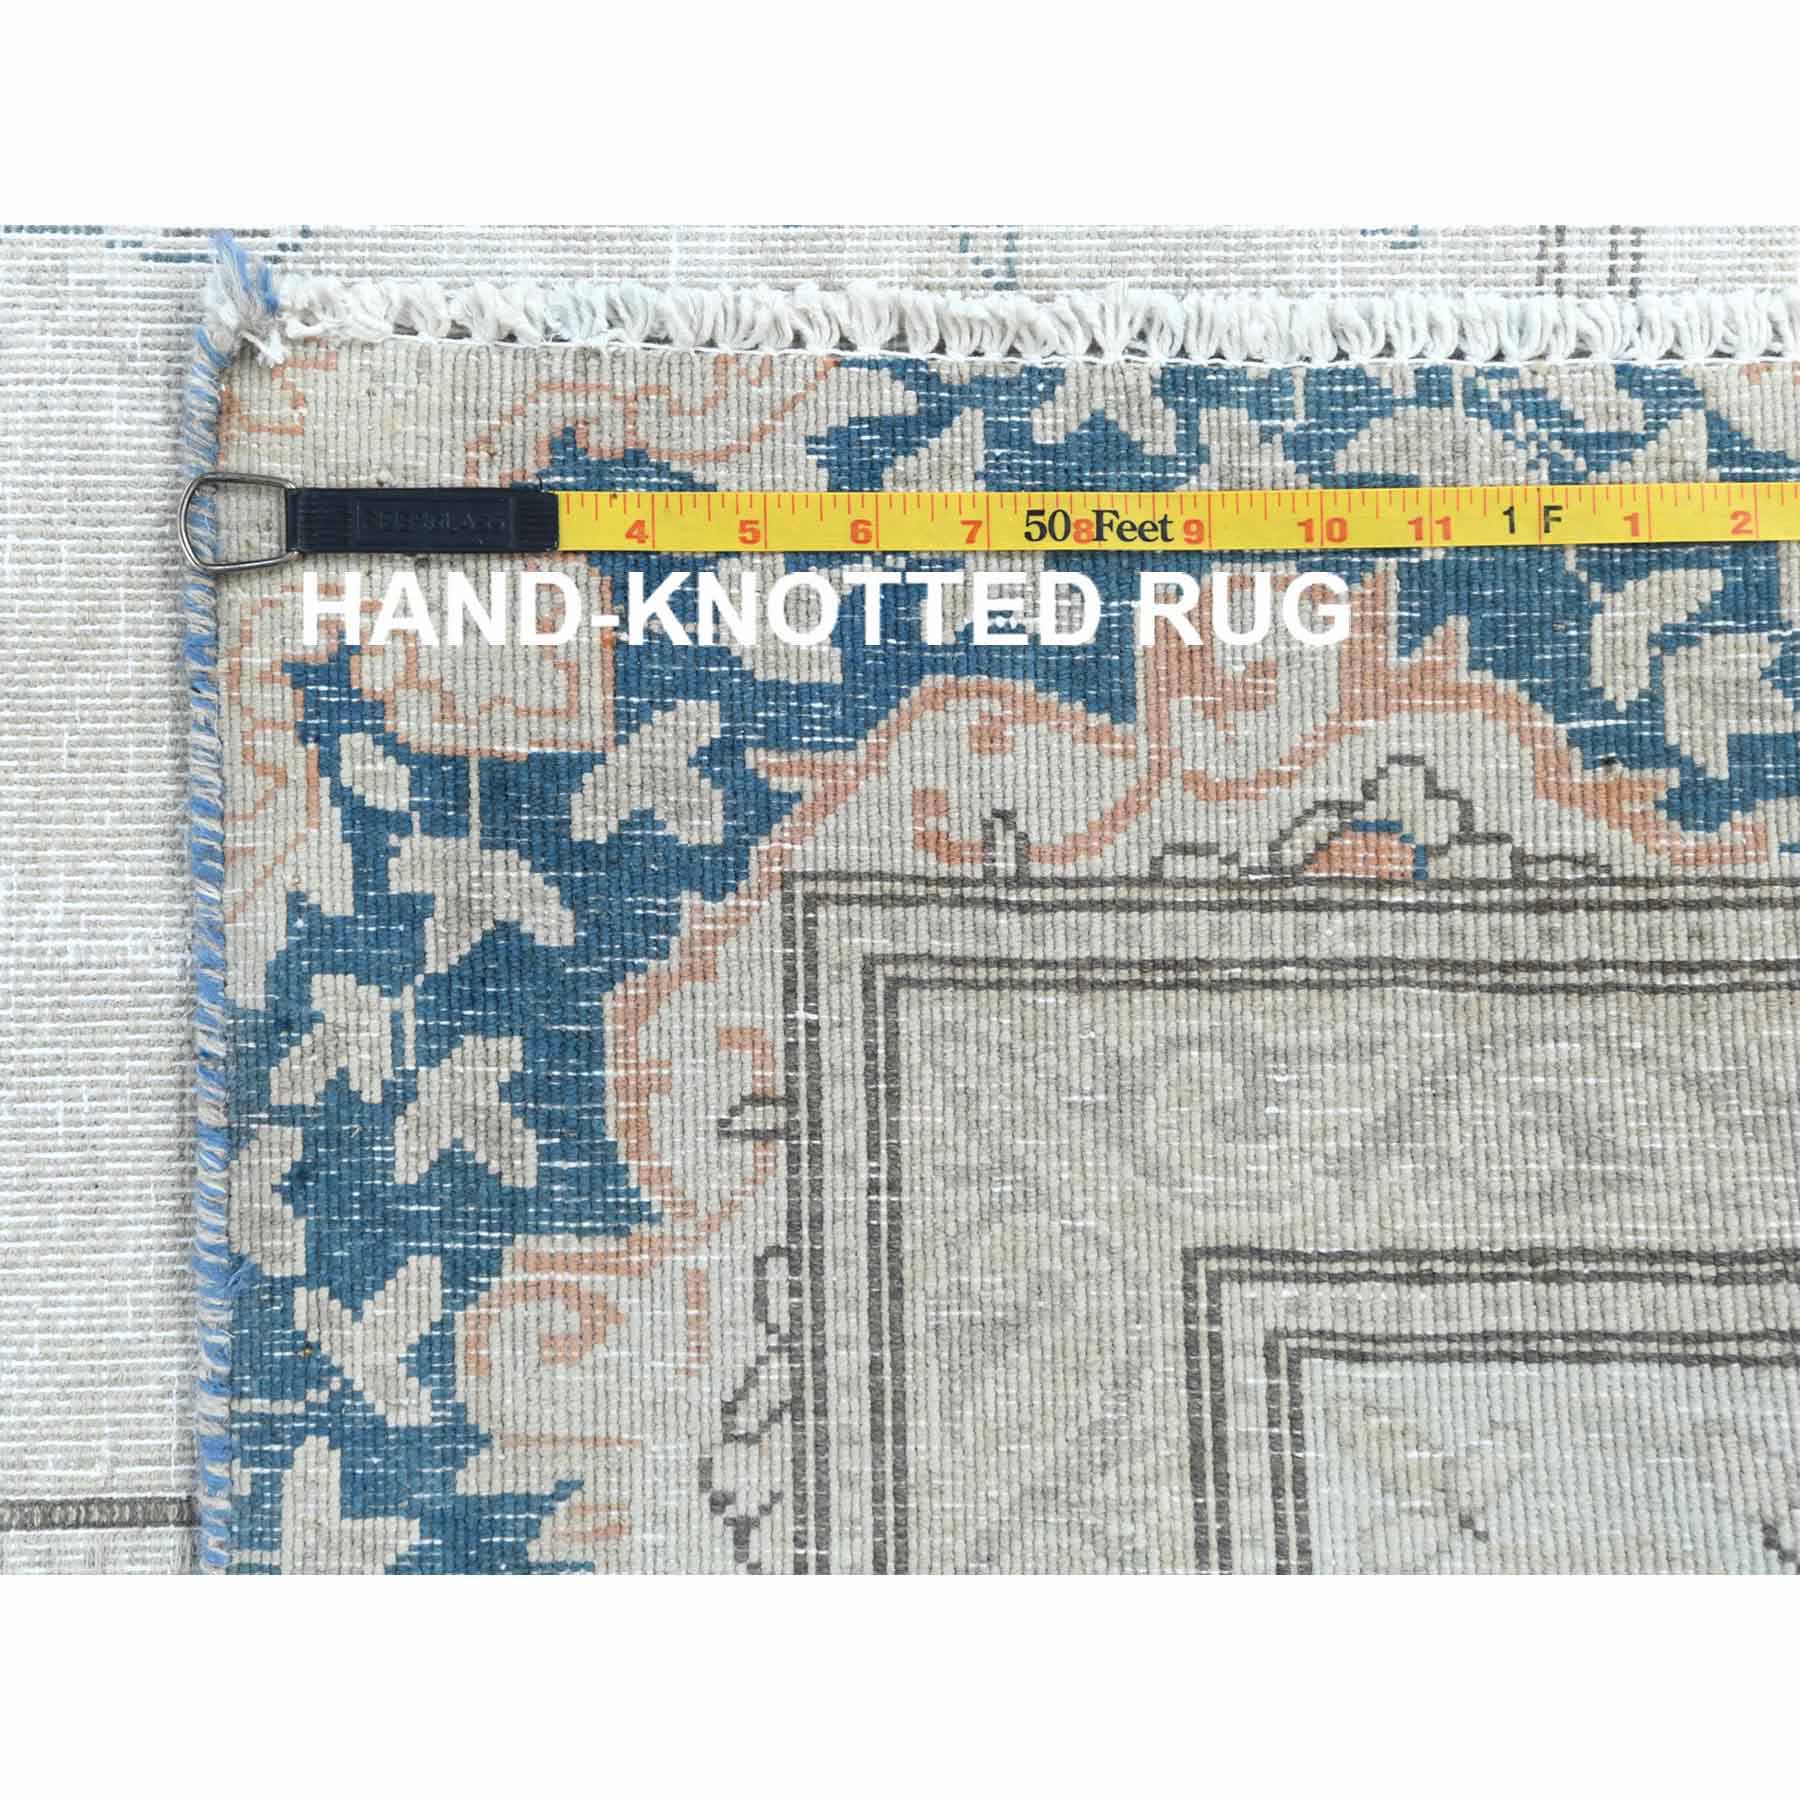 Overdyed-Vintage-Hand-Knotted-Rug-308540